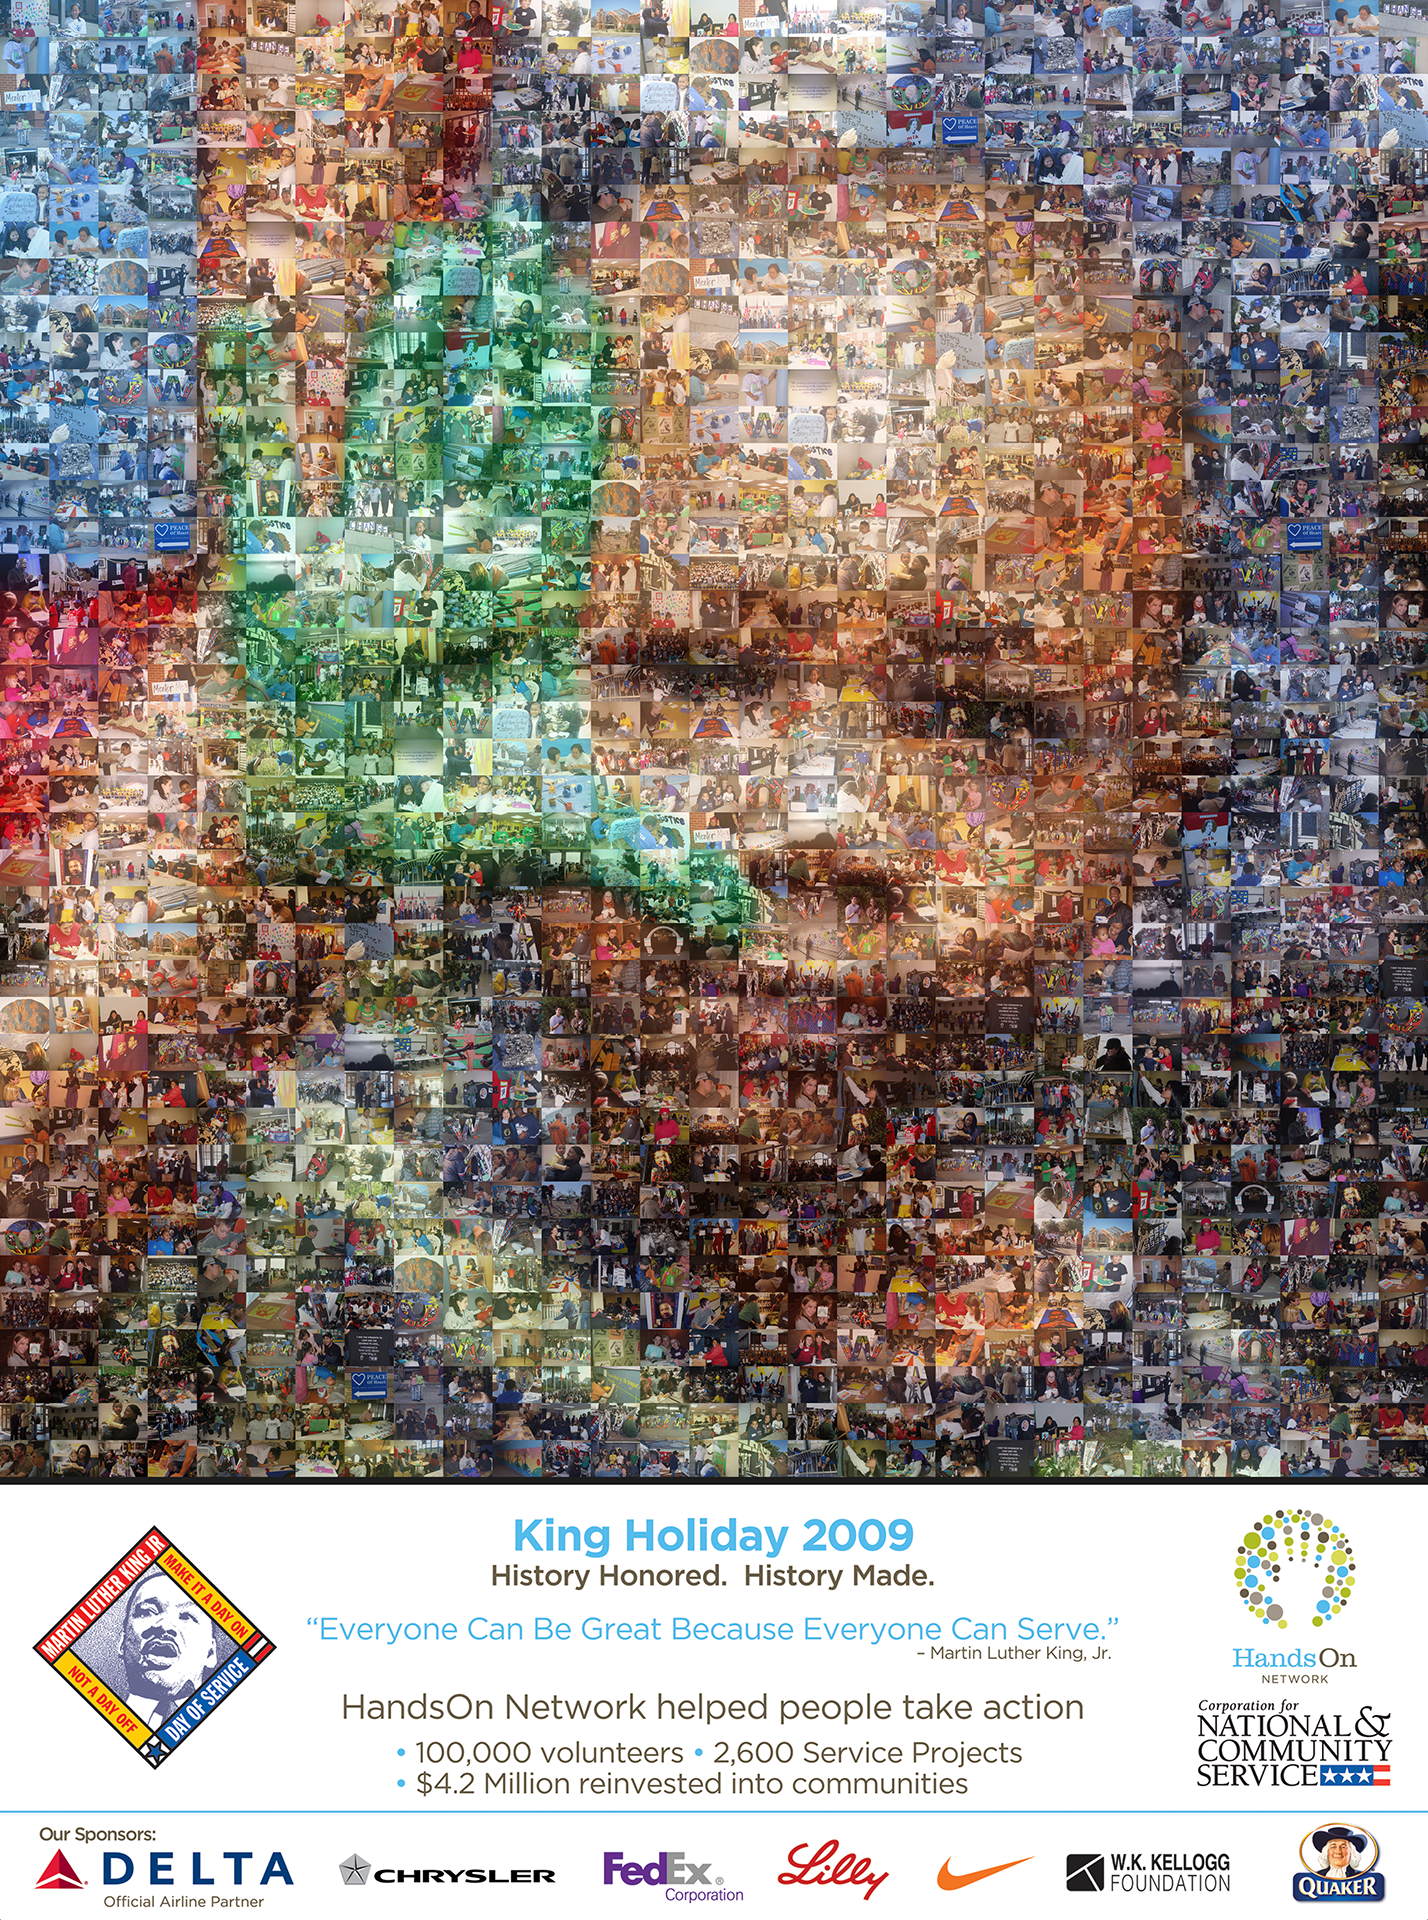 photo mosaic This banner was created for MLK day 2009 using 294 photos